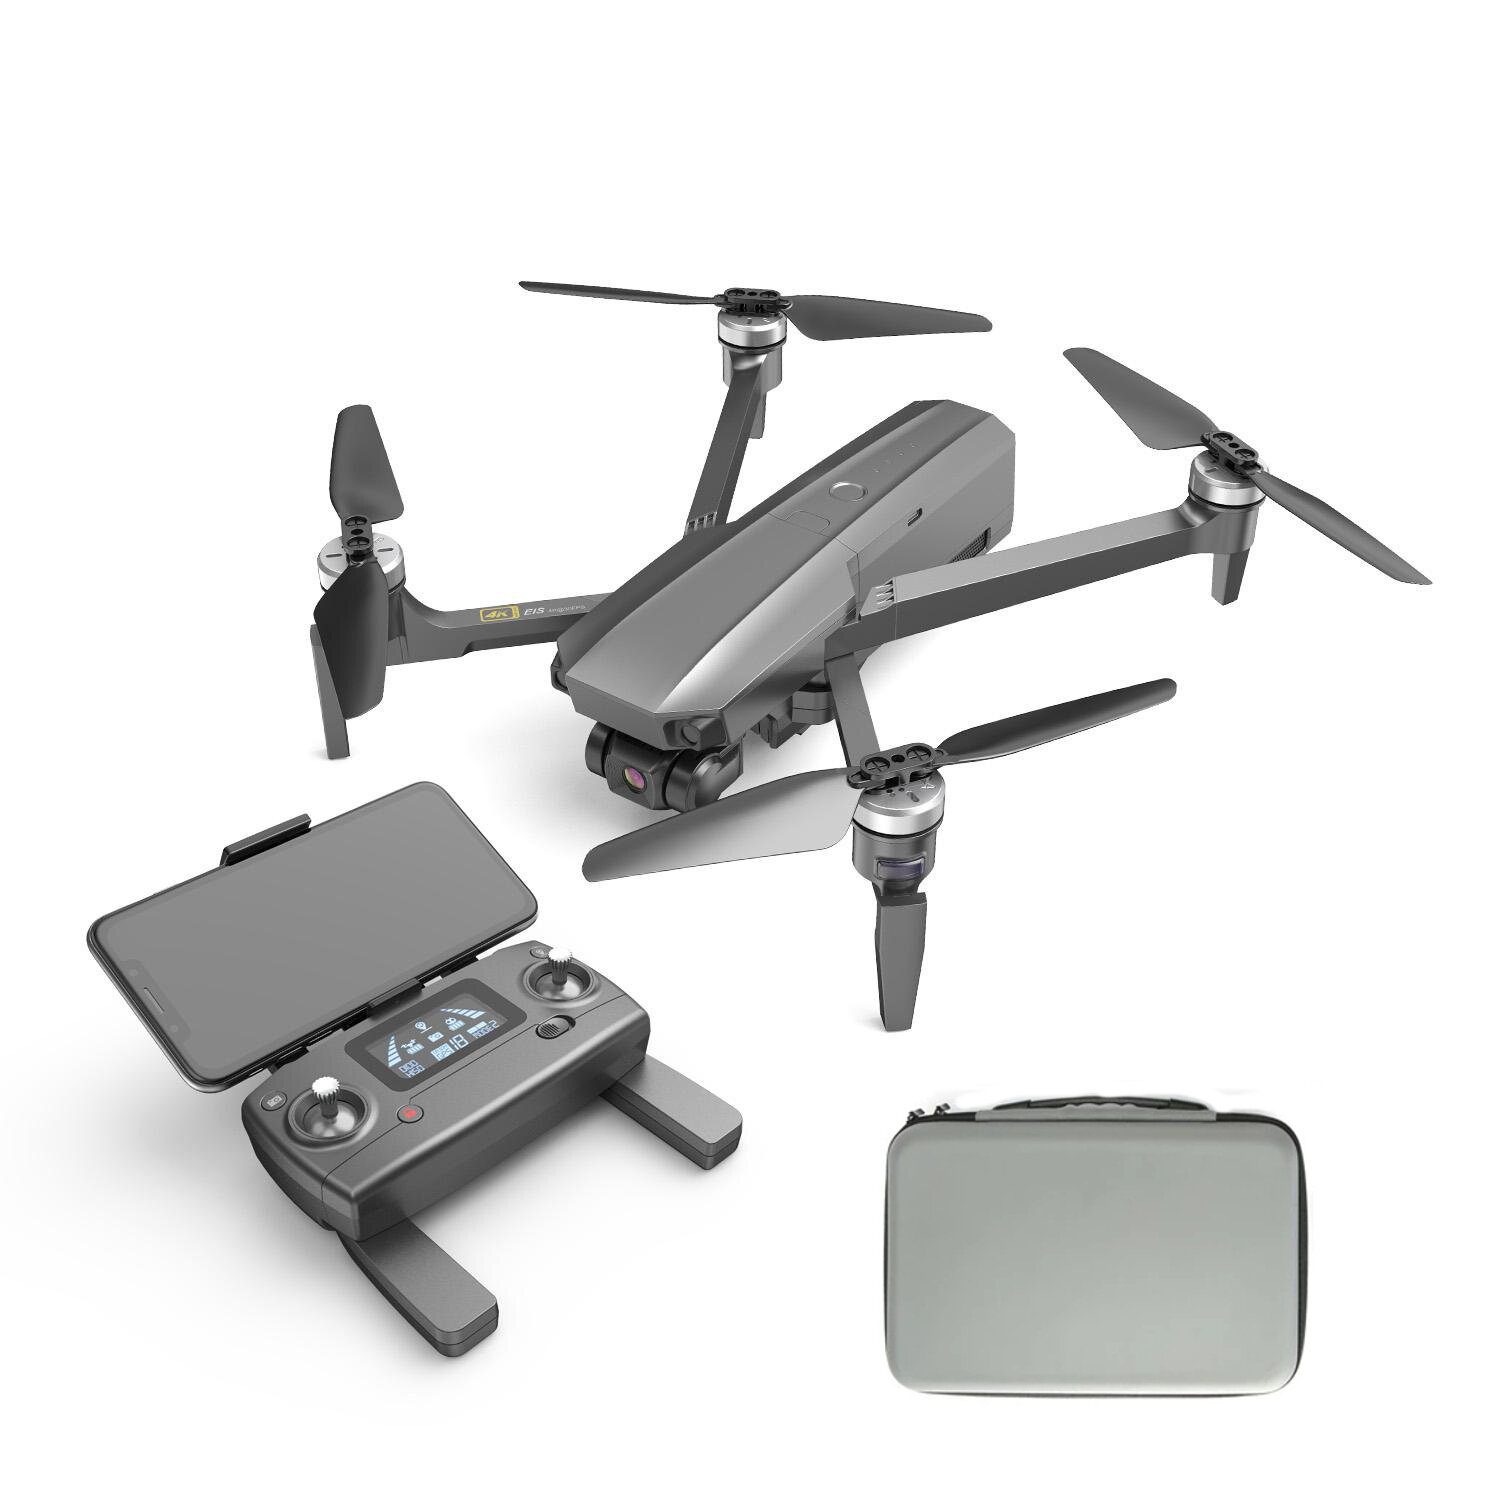 MJX Bugs 16 Pro B16 Pro EIS 5G WIFI FPV With 3-axis...